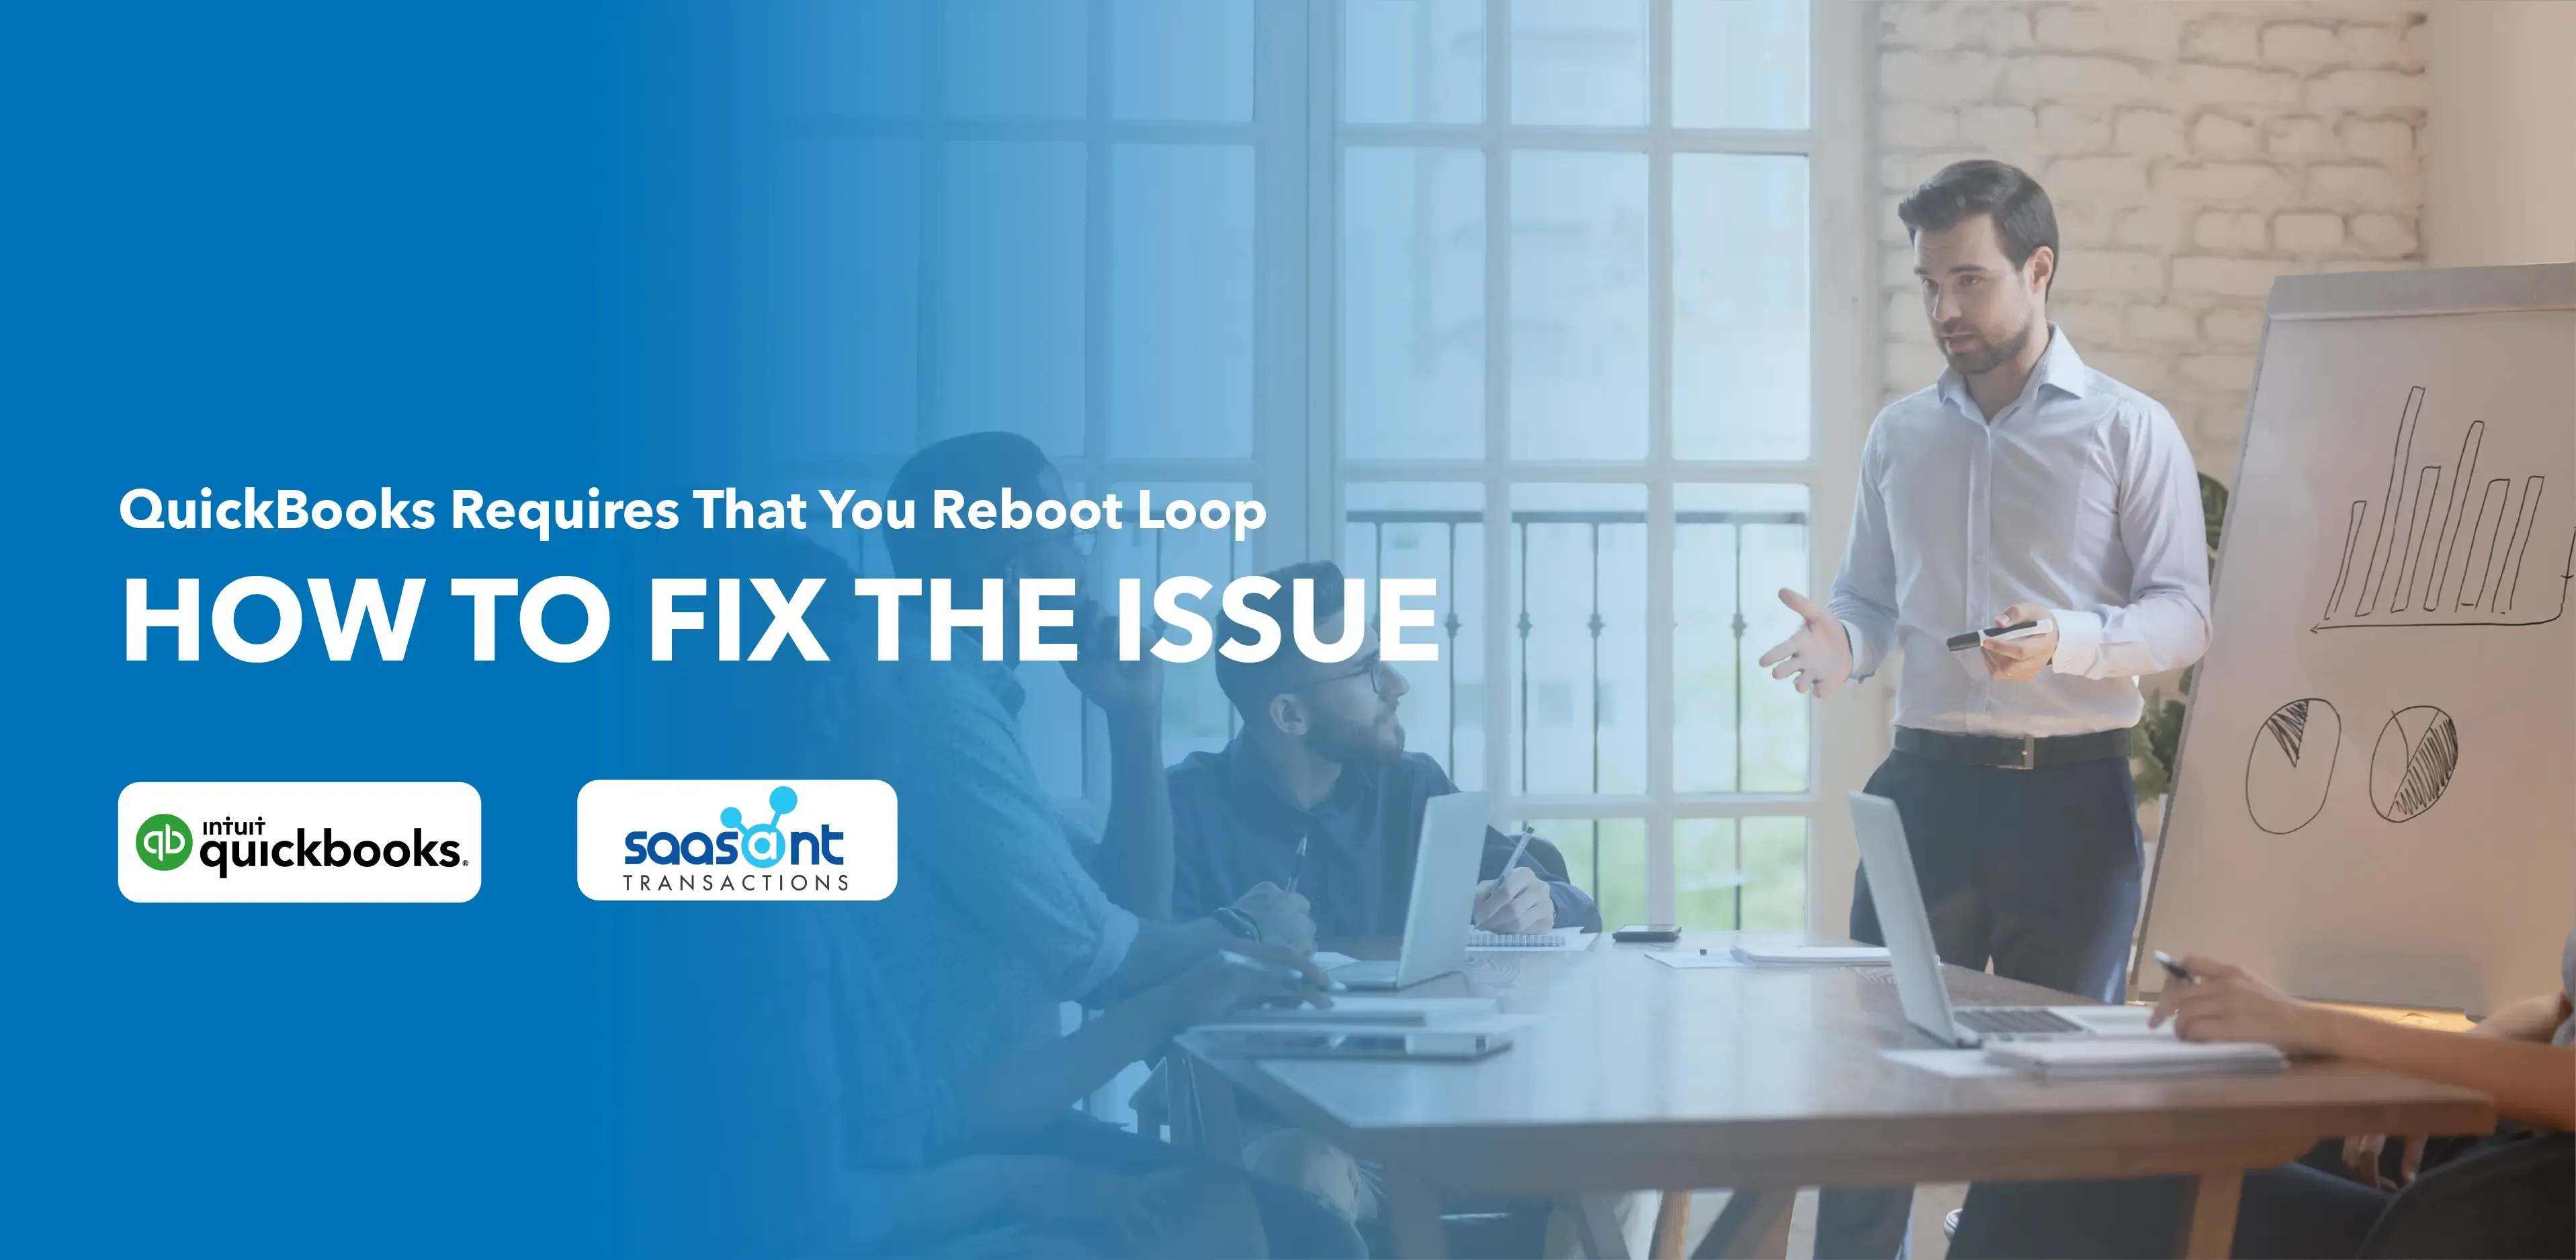 QuickBooks Requires That You Reboot Loop: How to Fix the Issue